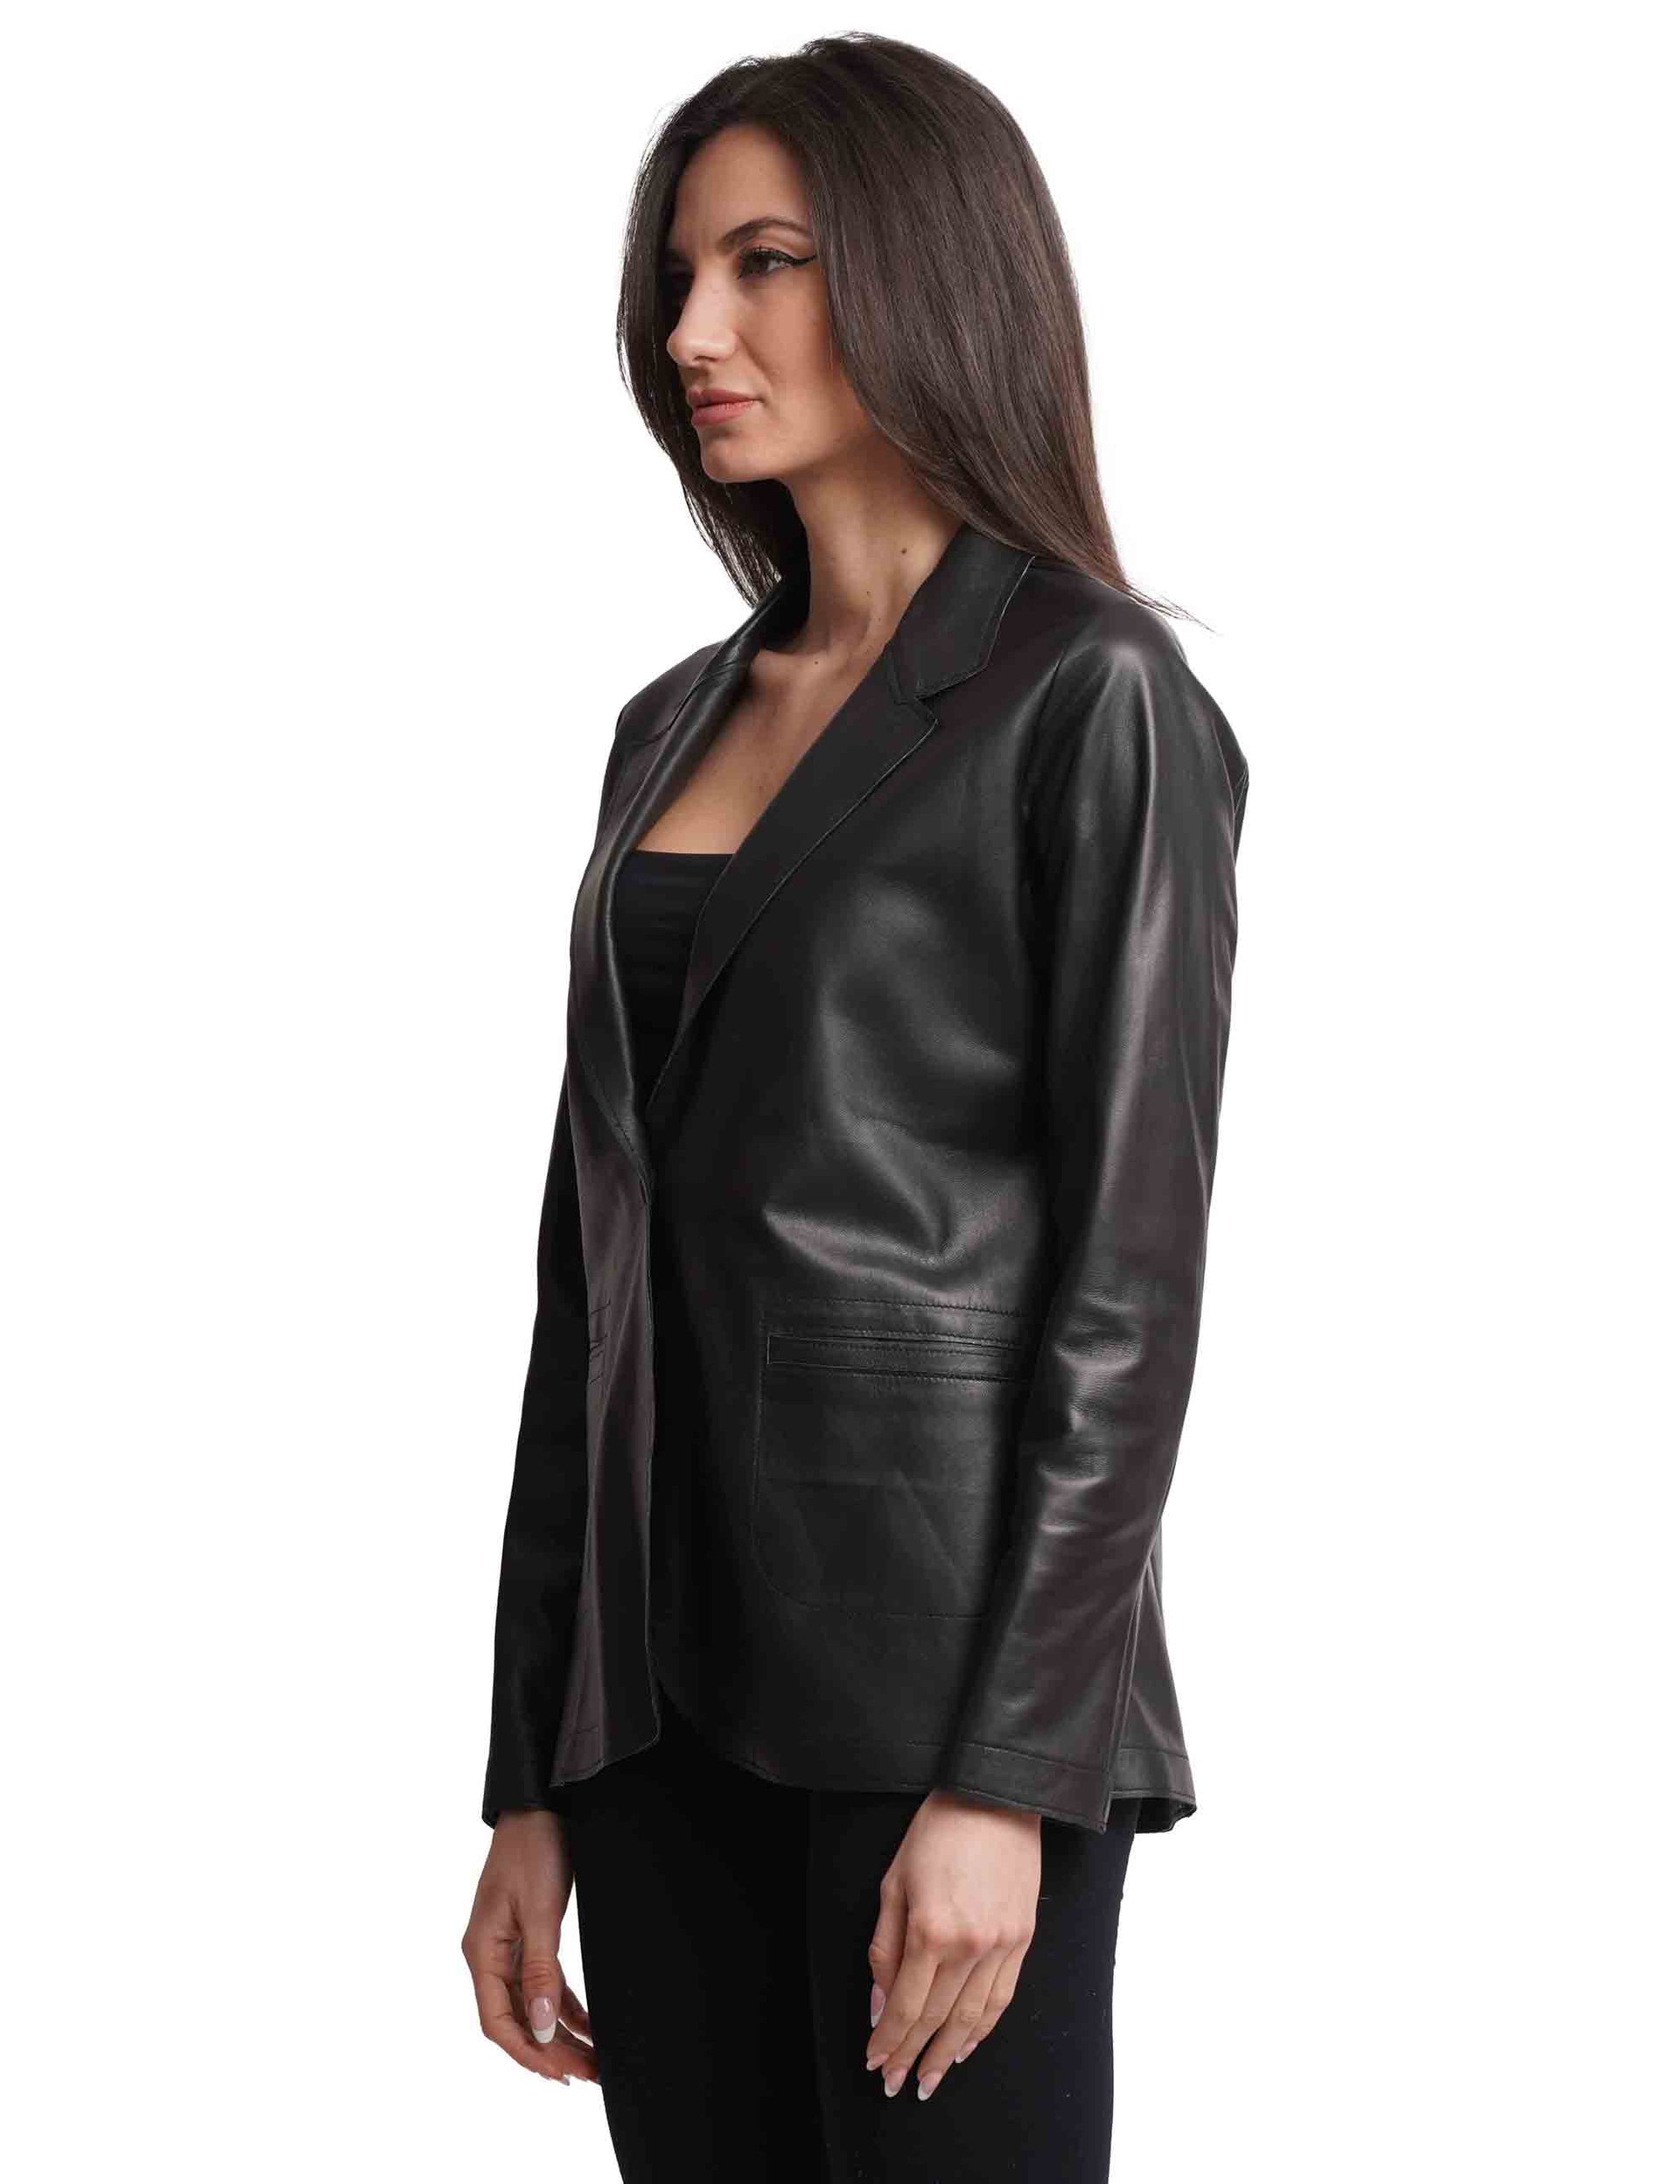 Single-breasted women's jackets in black unlined leather with 1 button